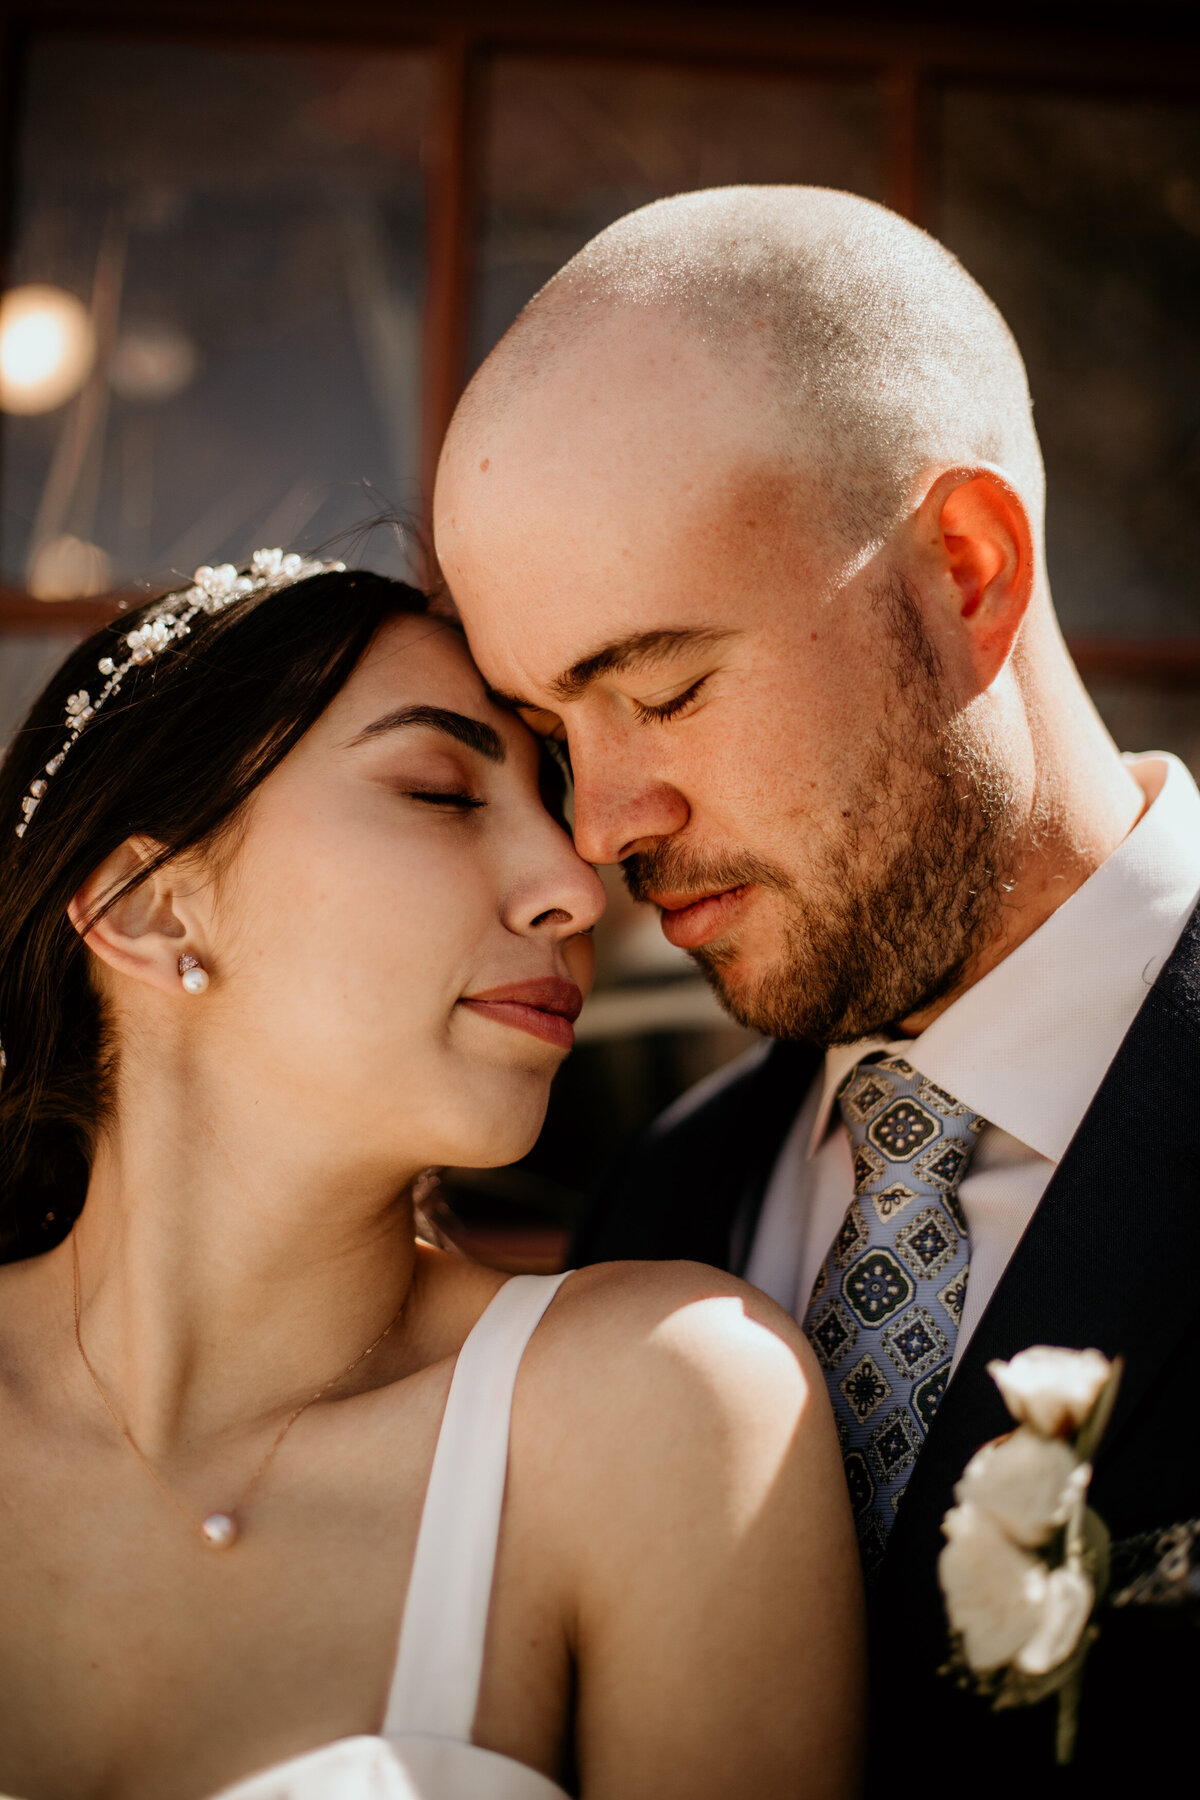 Bride and groom with heads close together